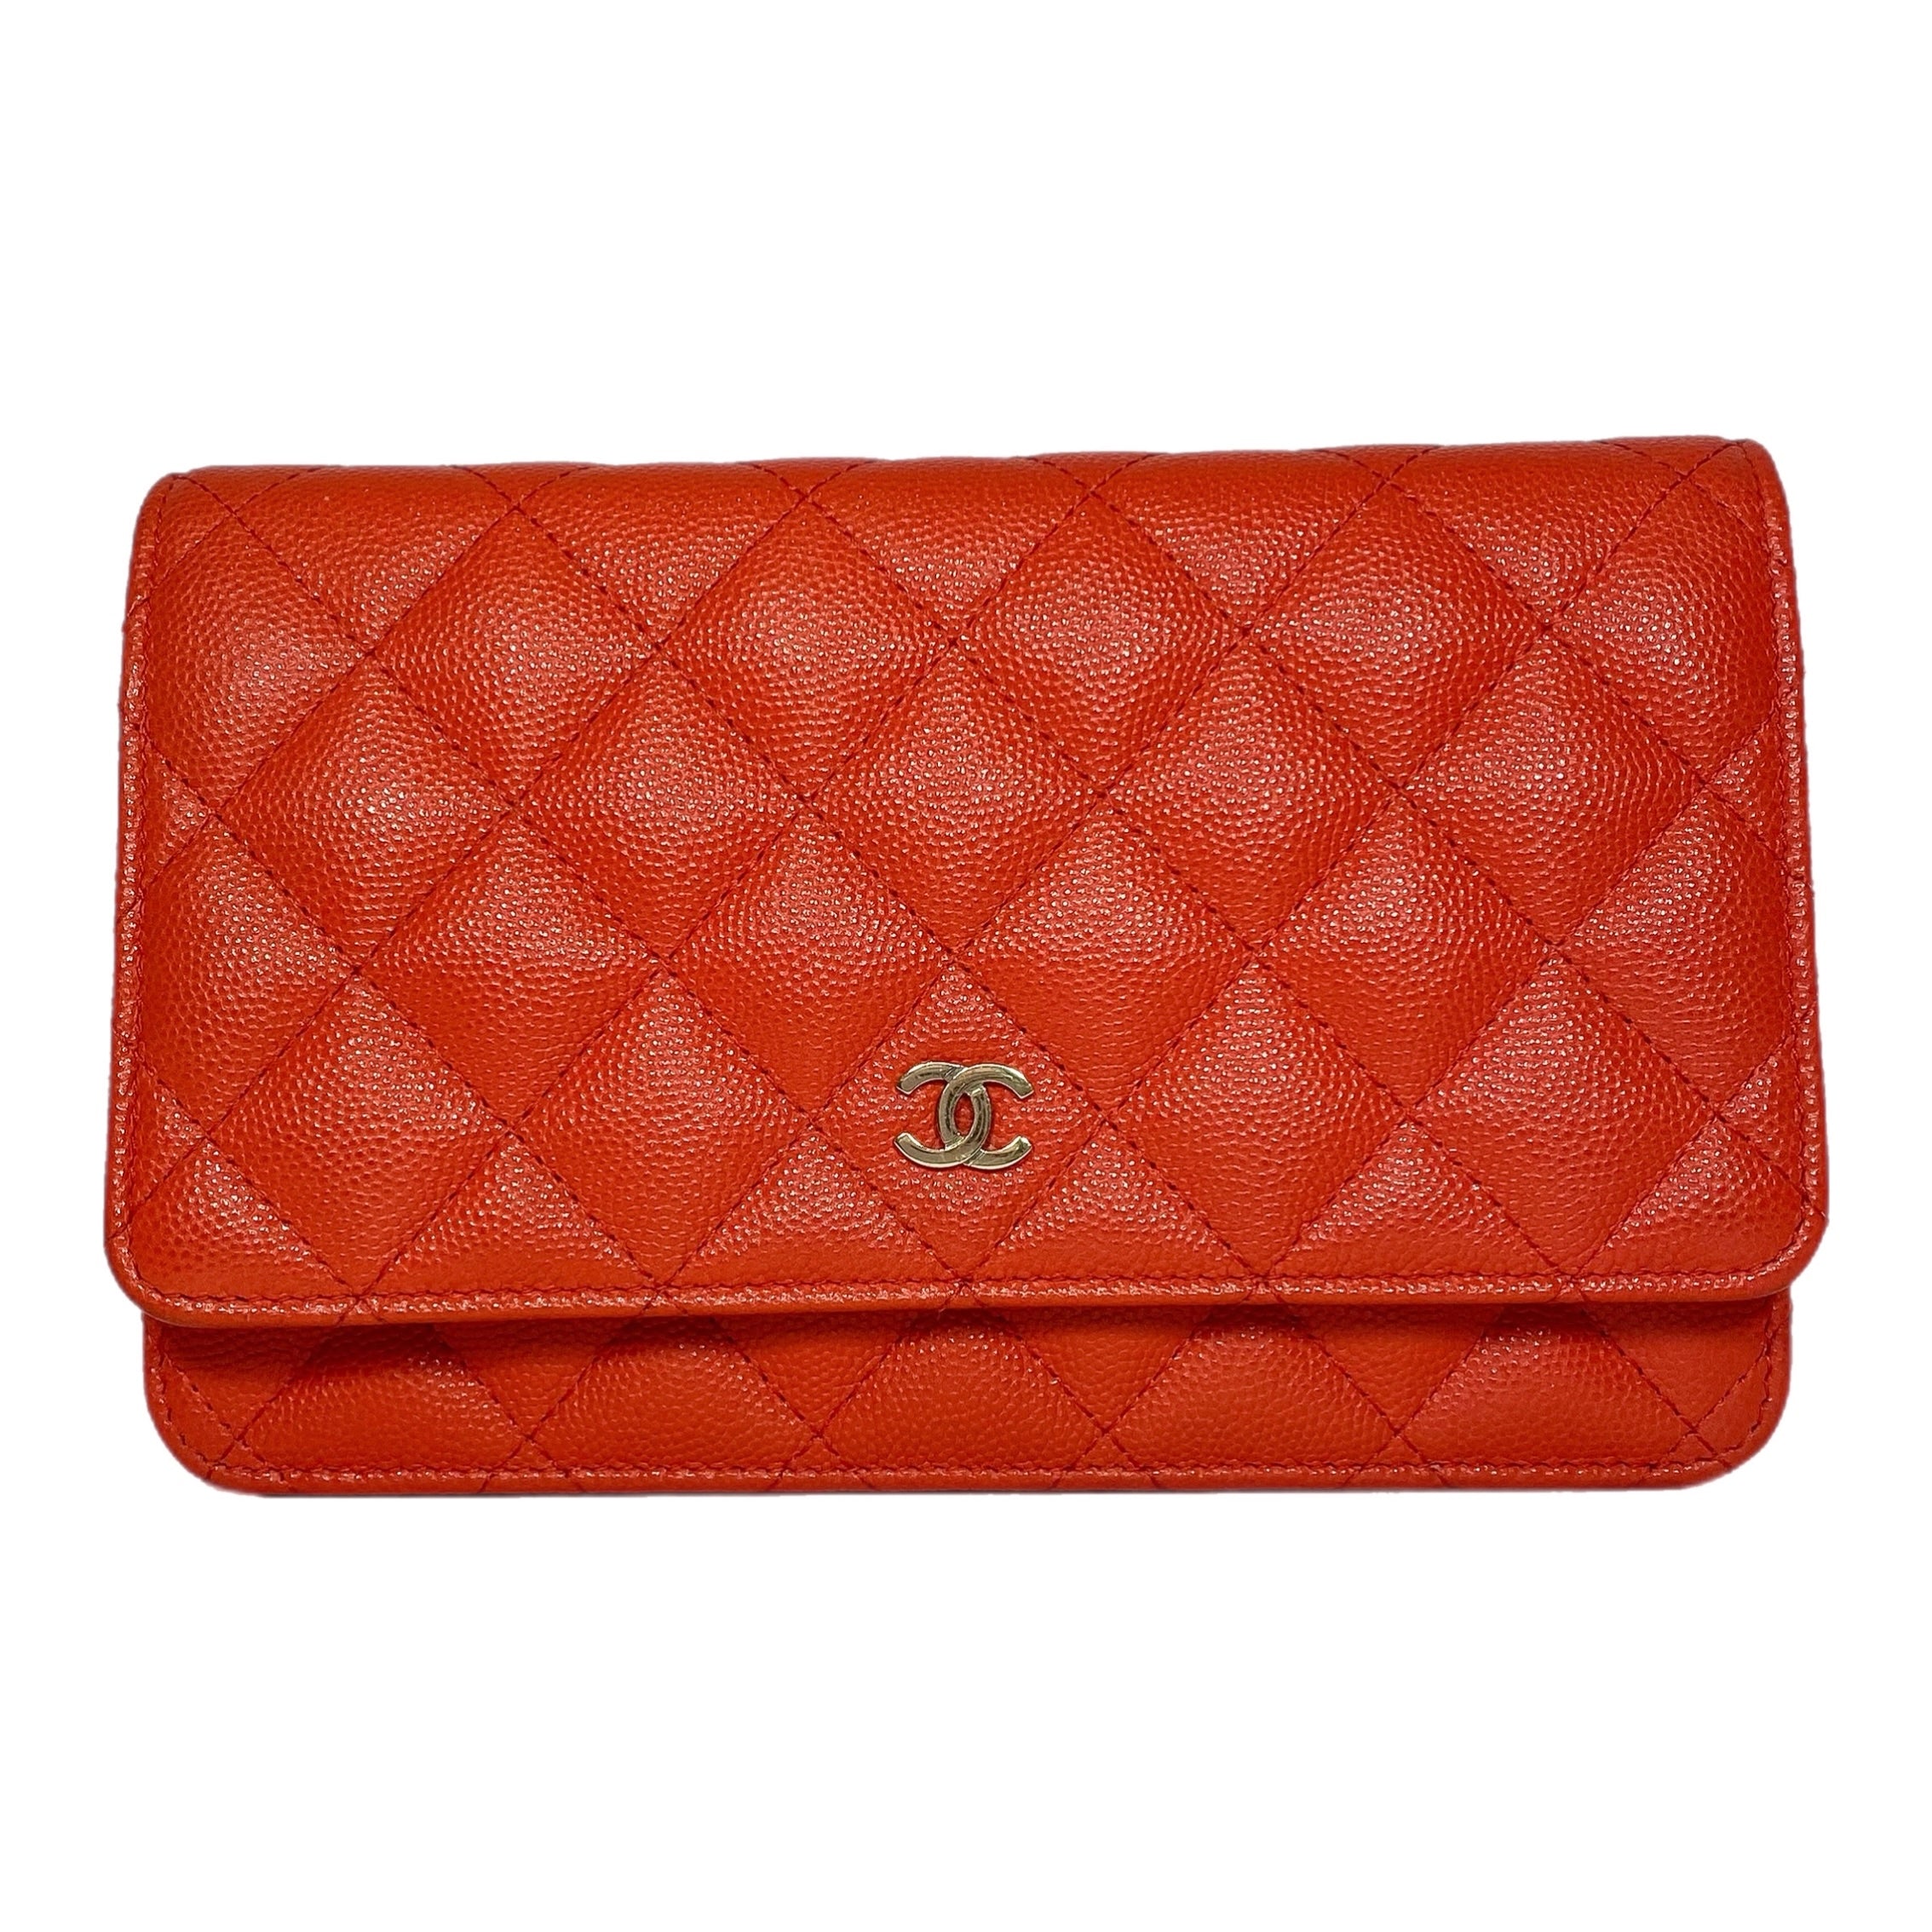 Chanel Red Coral Caviar Wallet on Chain